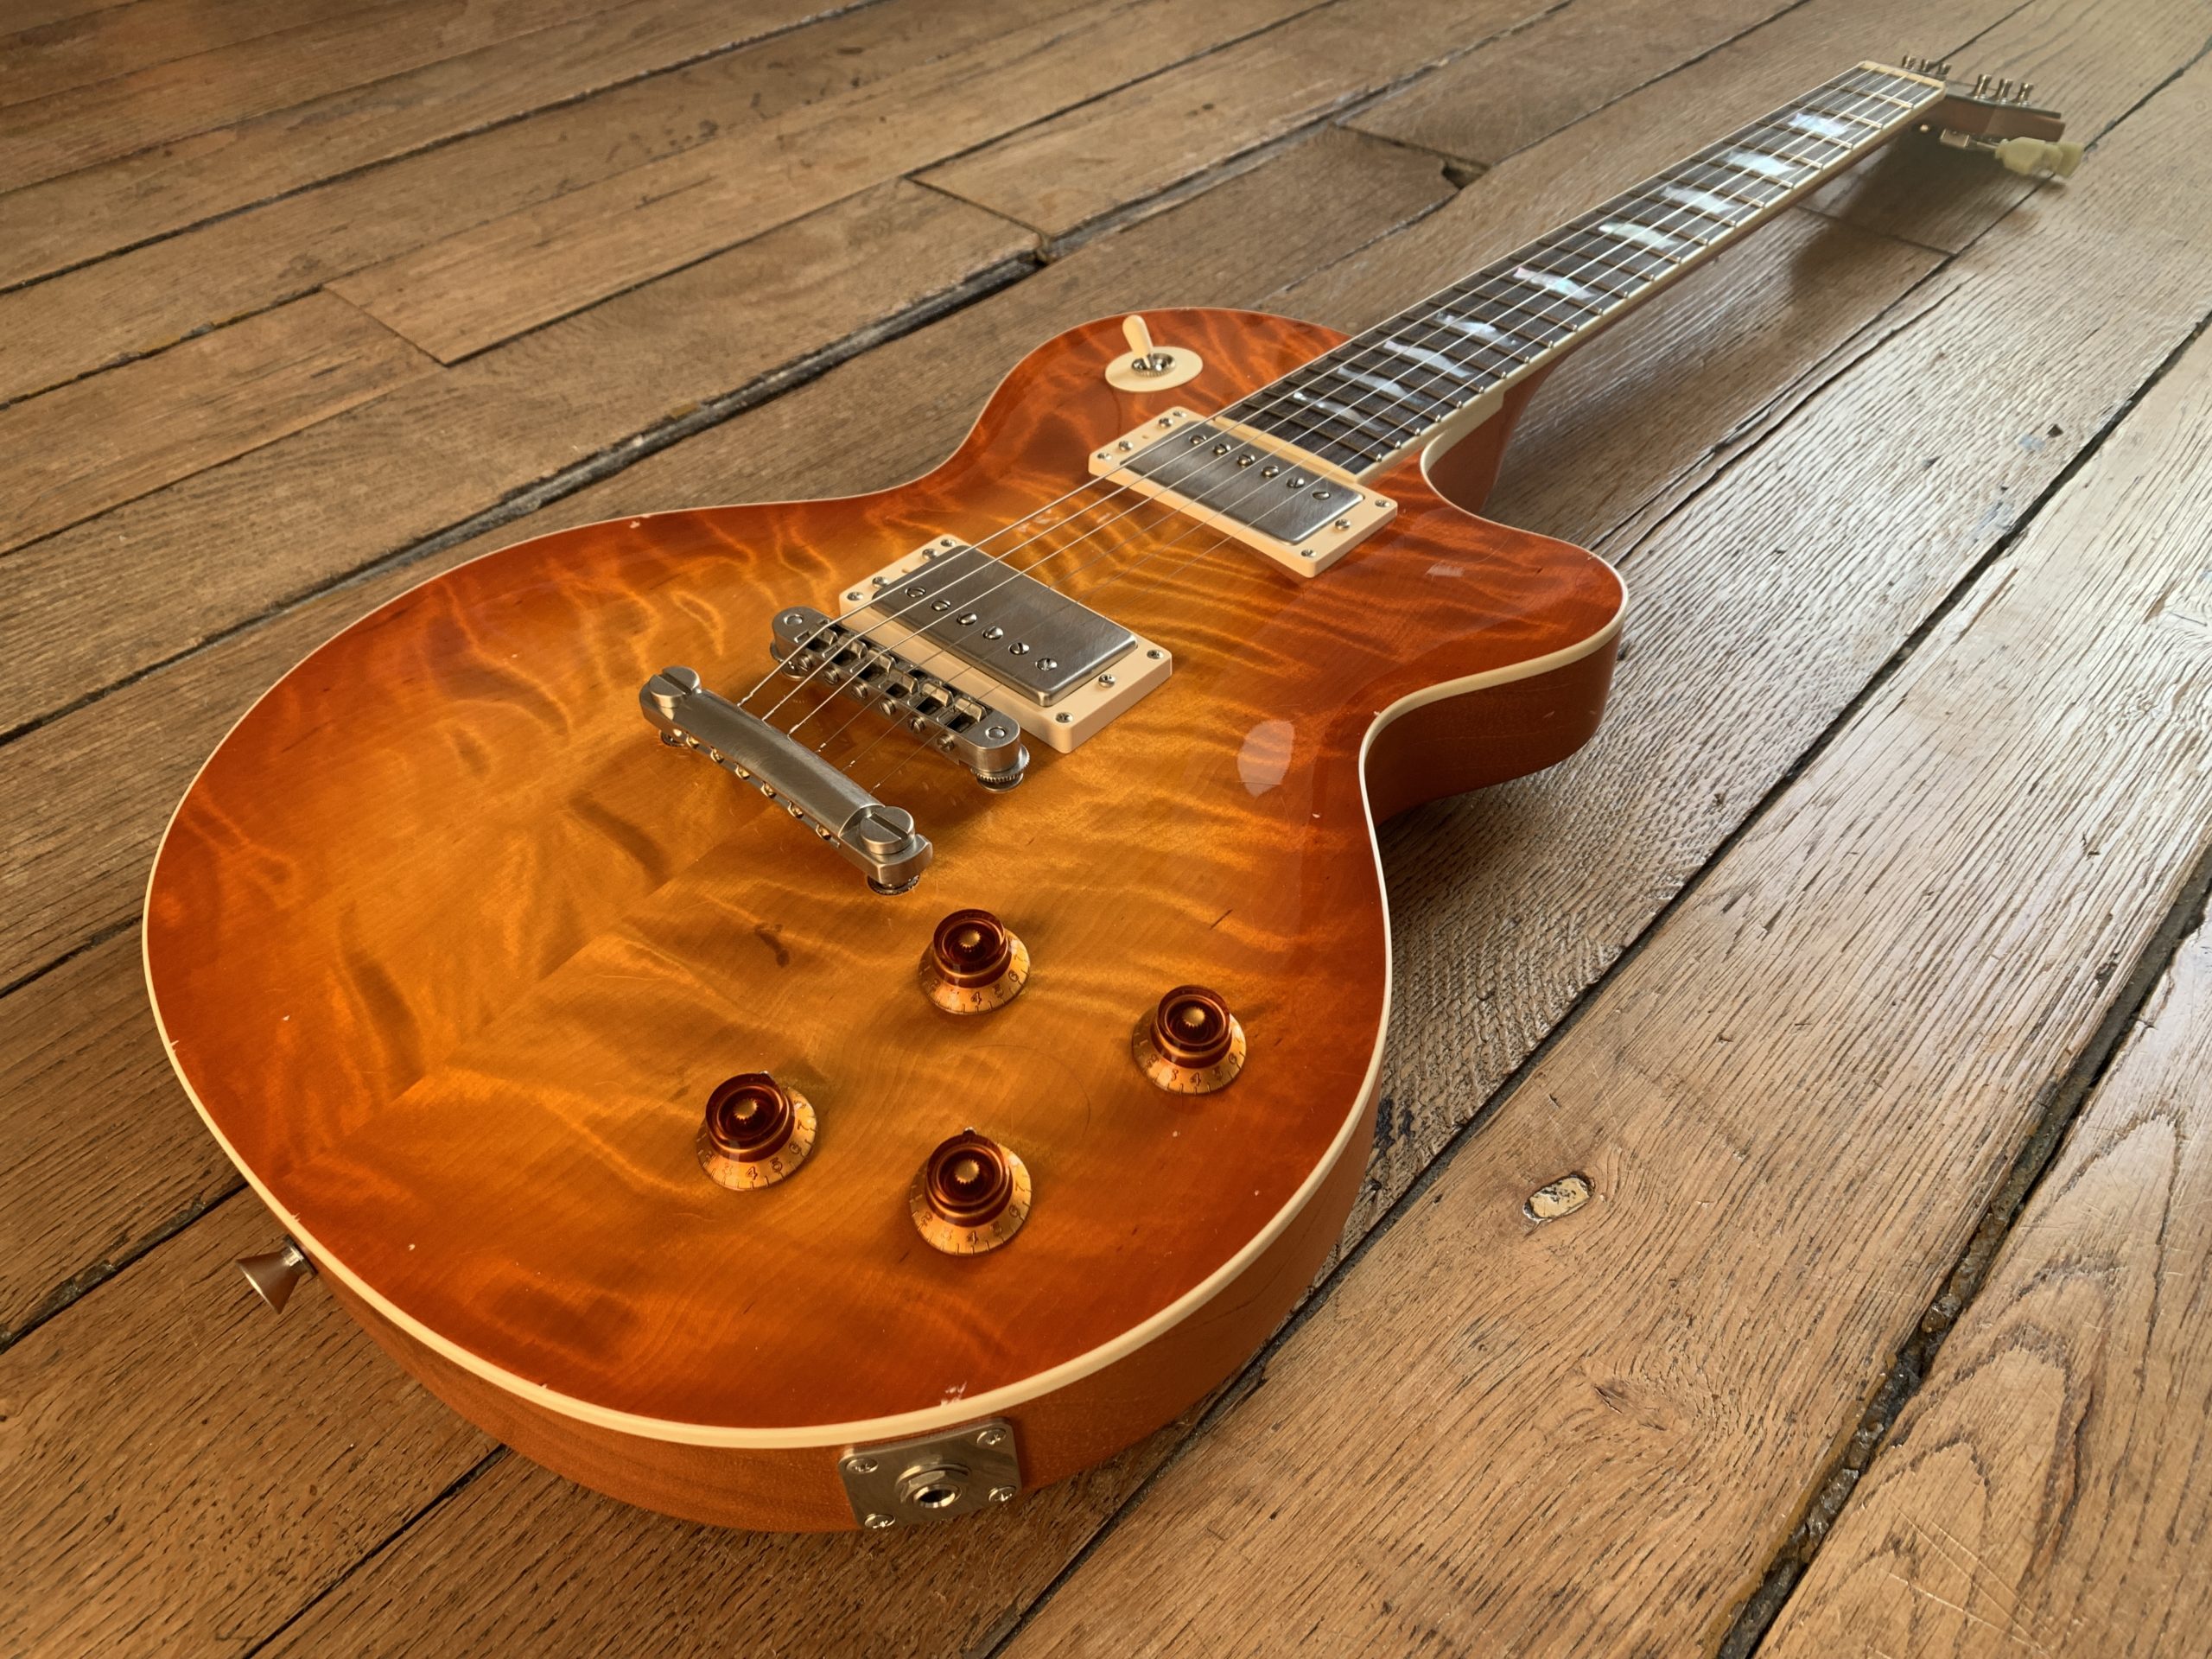 Unicorn Classic Ruokangas, a super high-end Les Paul type luthier's guitar